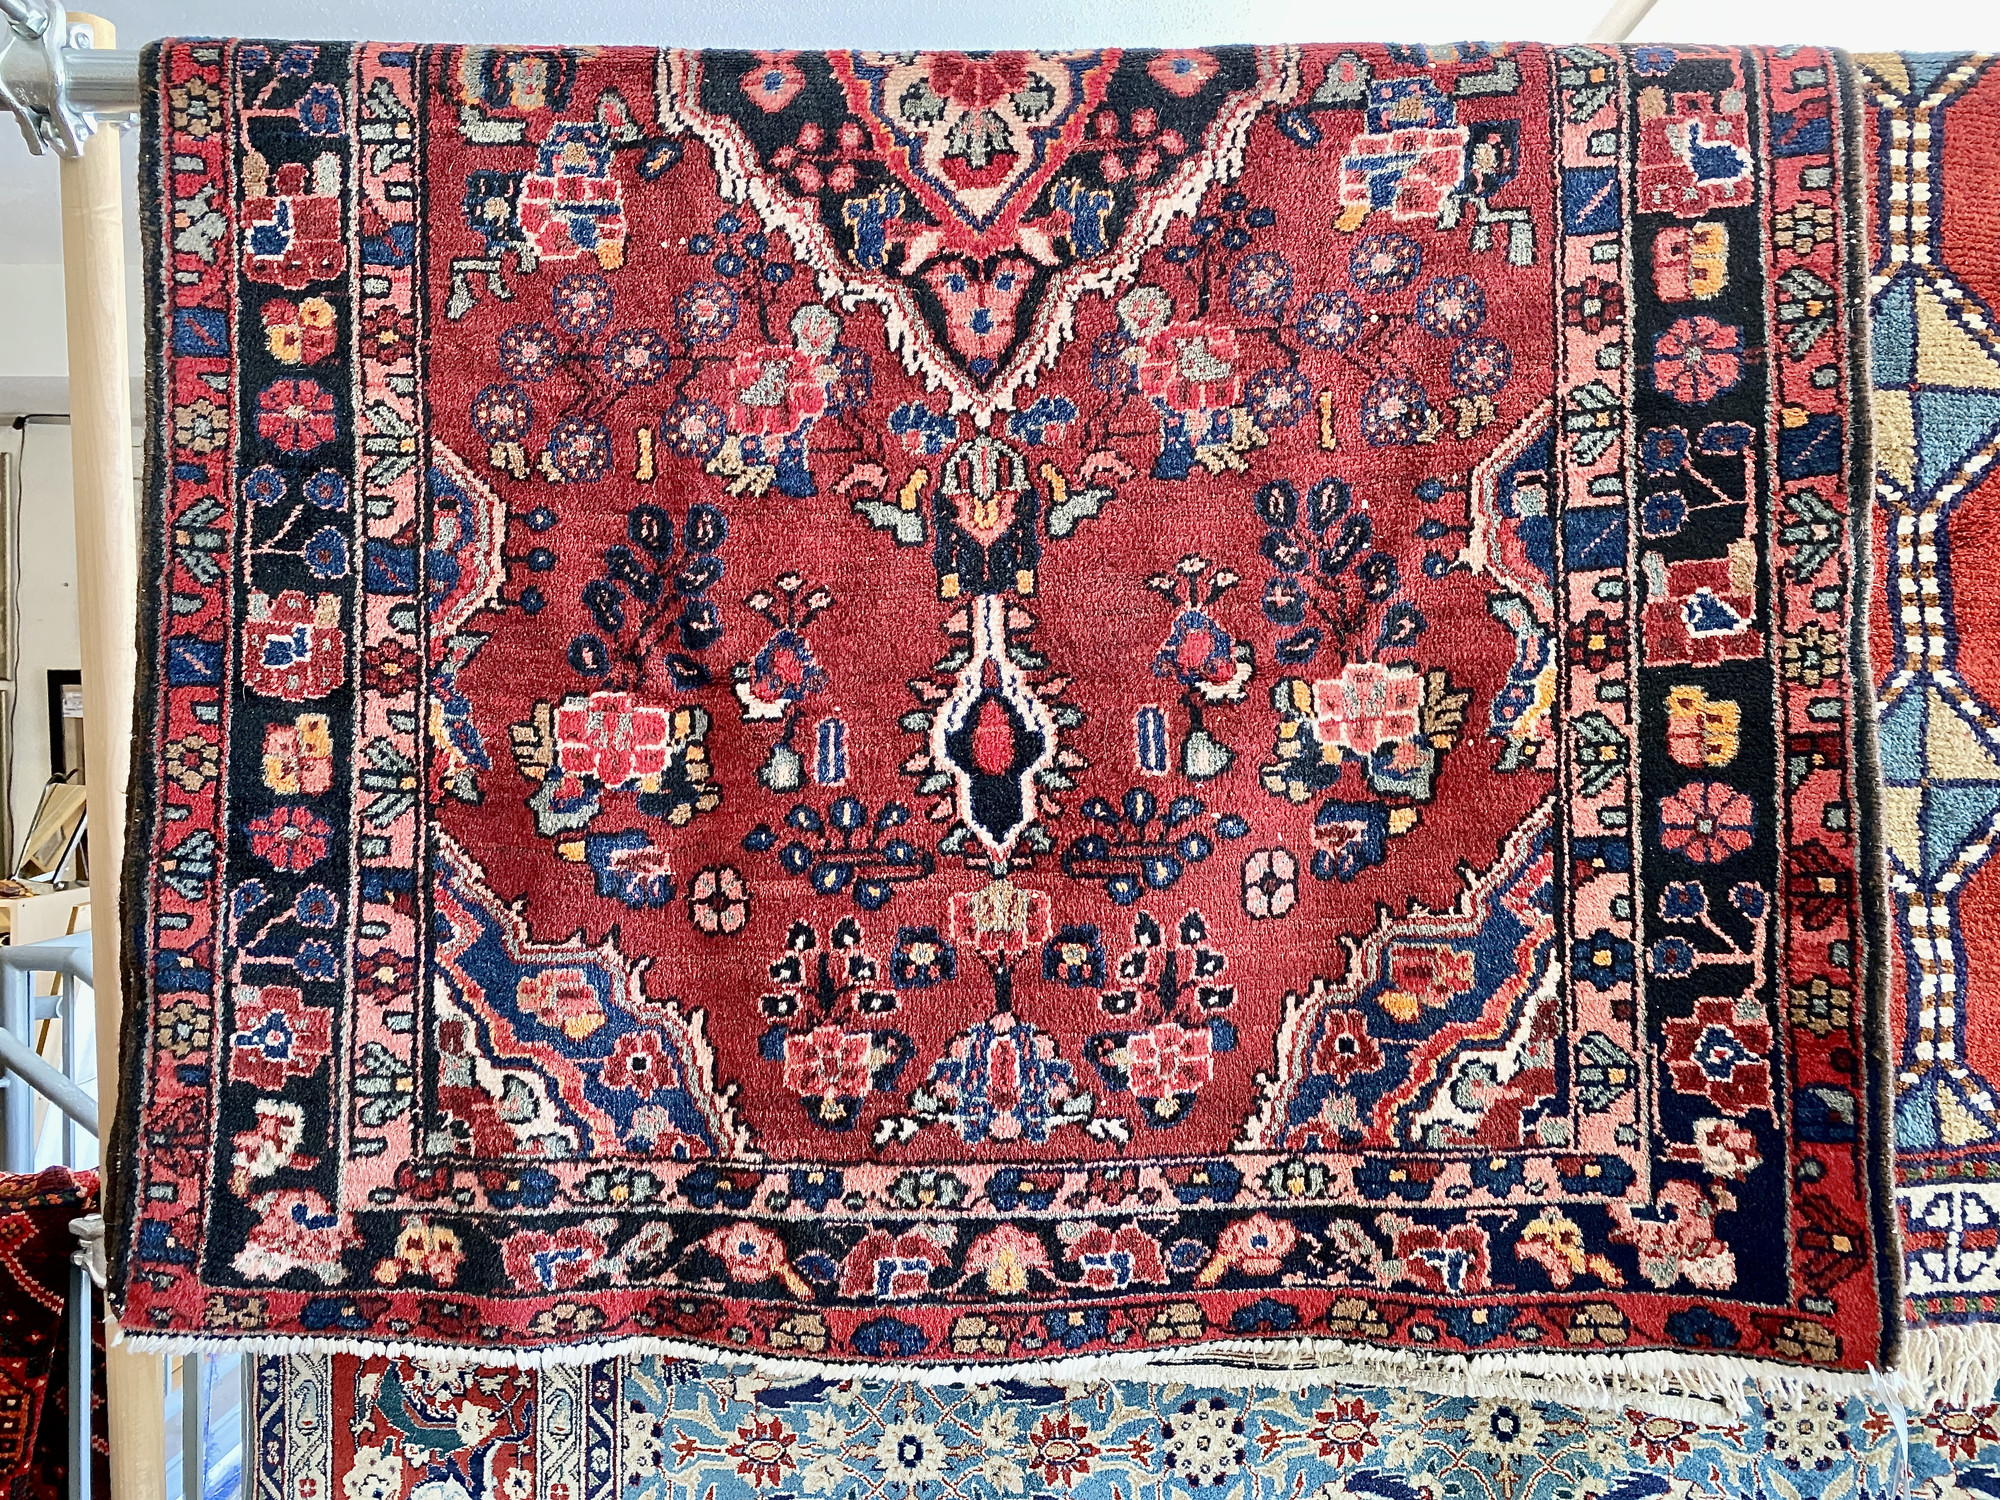 Persian Medaliion Rug
Size: 4x6